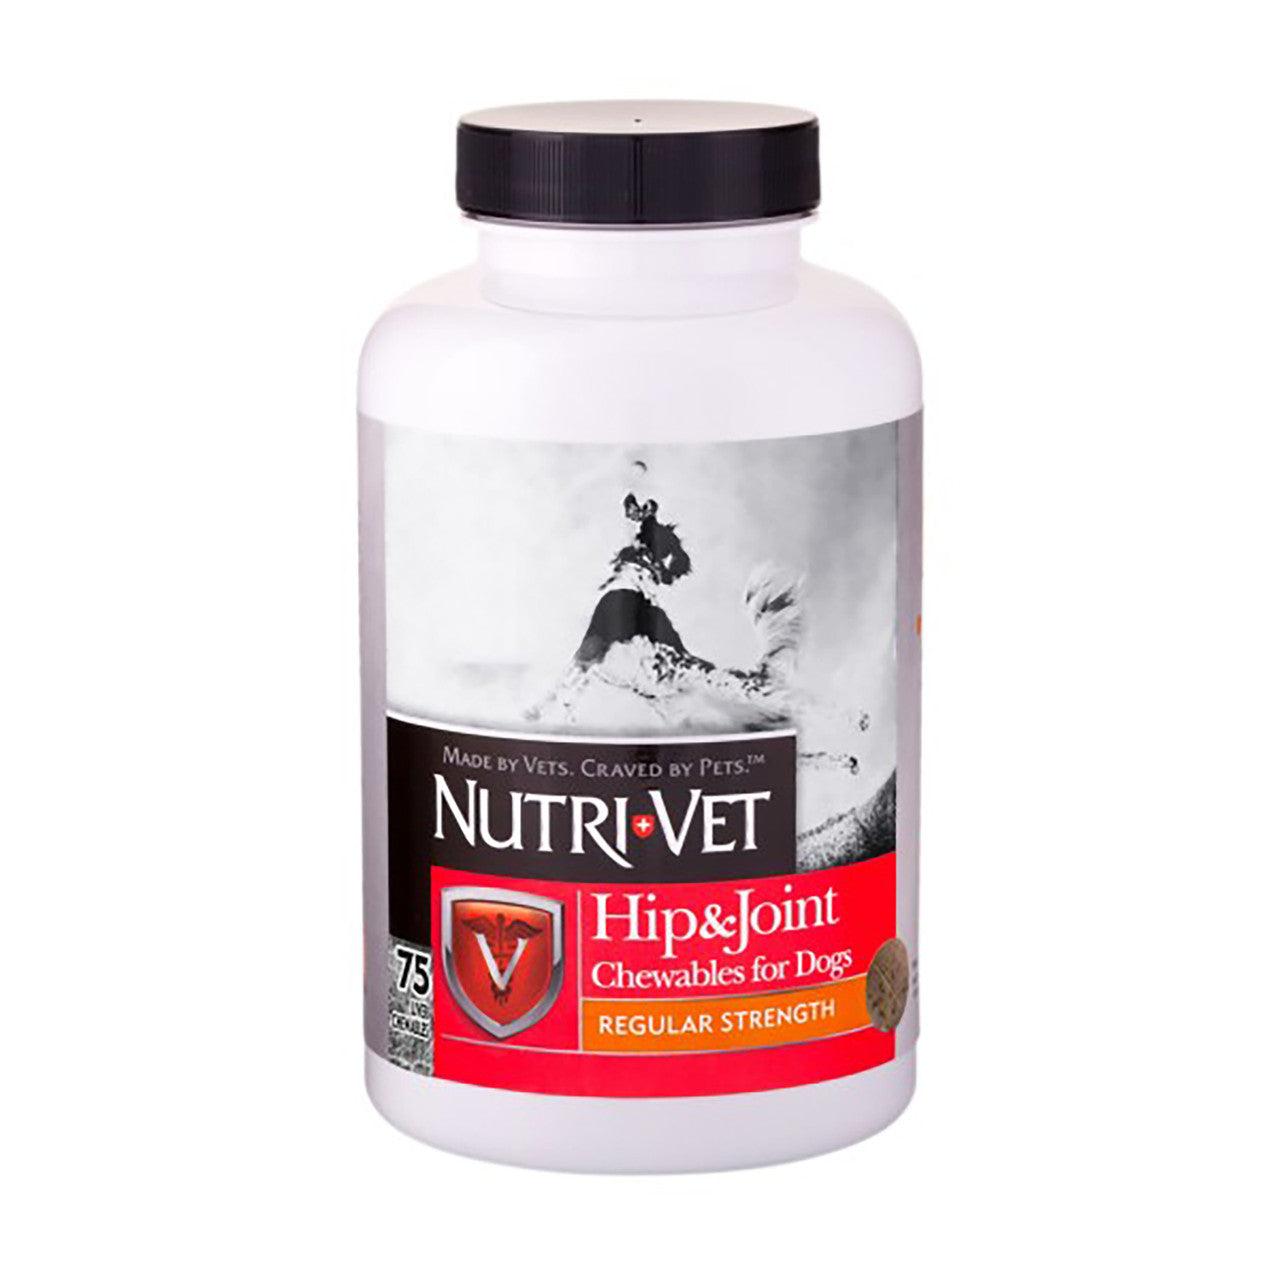 Nutri-Vet Hip & Joint Early Care Liver Chewables 75 Count